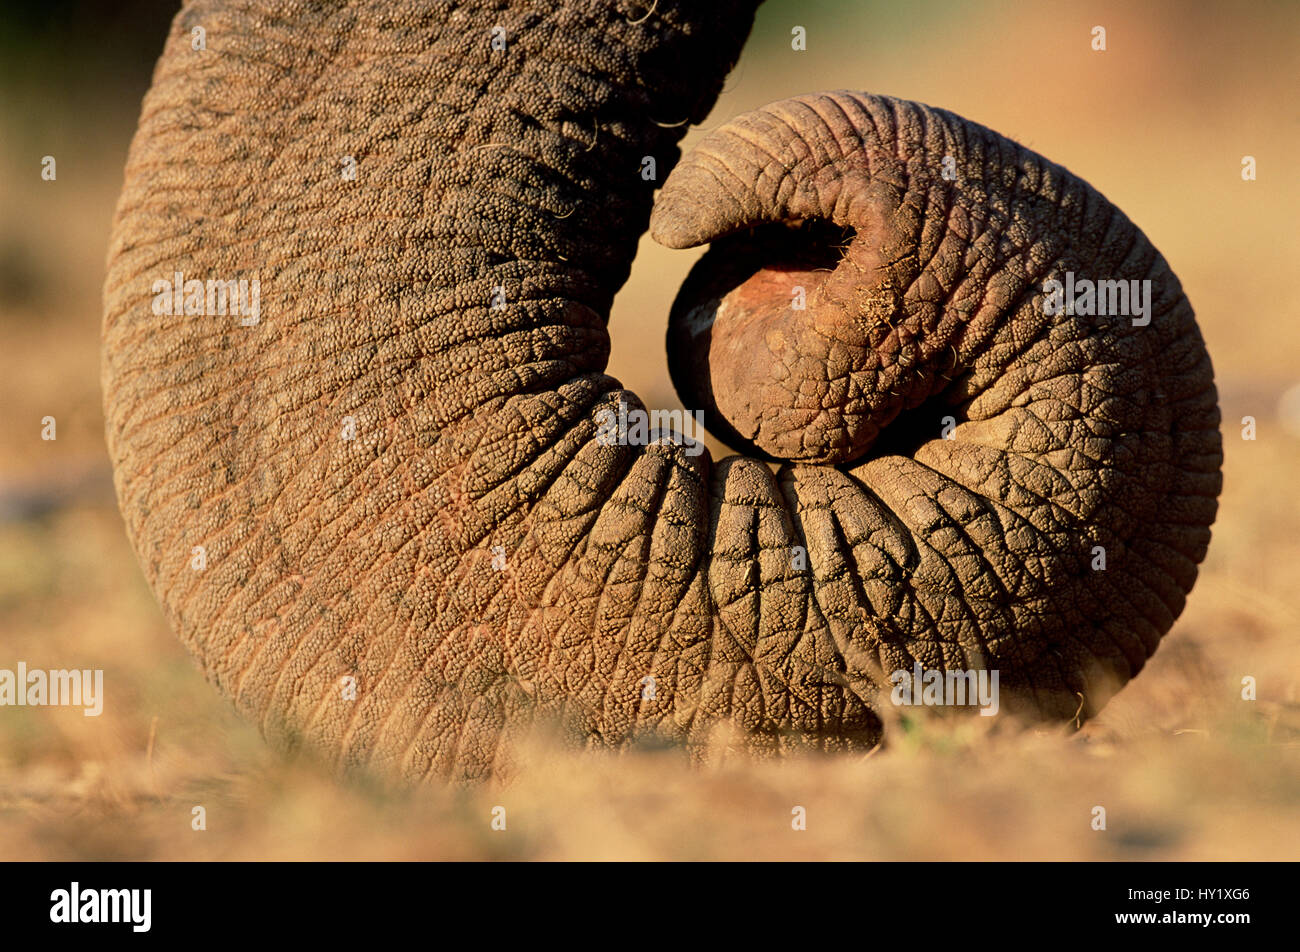 Close up of curled tip of trunk of Indian elephant (Elephas maximus). India. Endangered species. Stock Photo